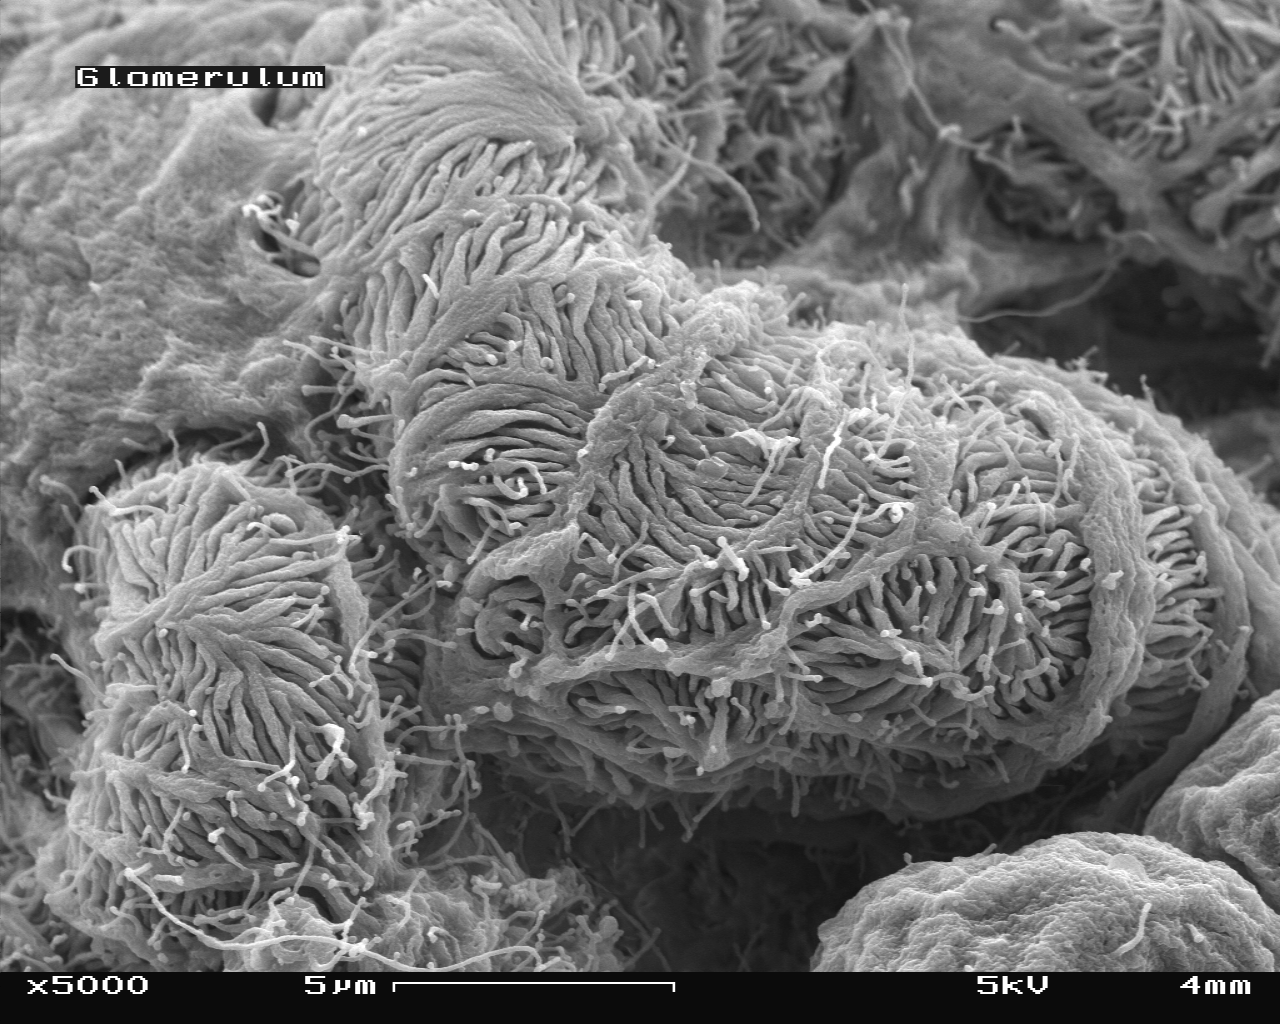 Mouse glomerulus in the SEM, magnification 5,000x